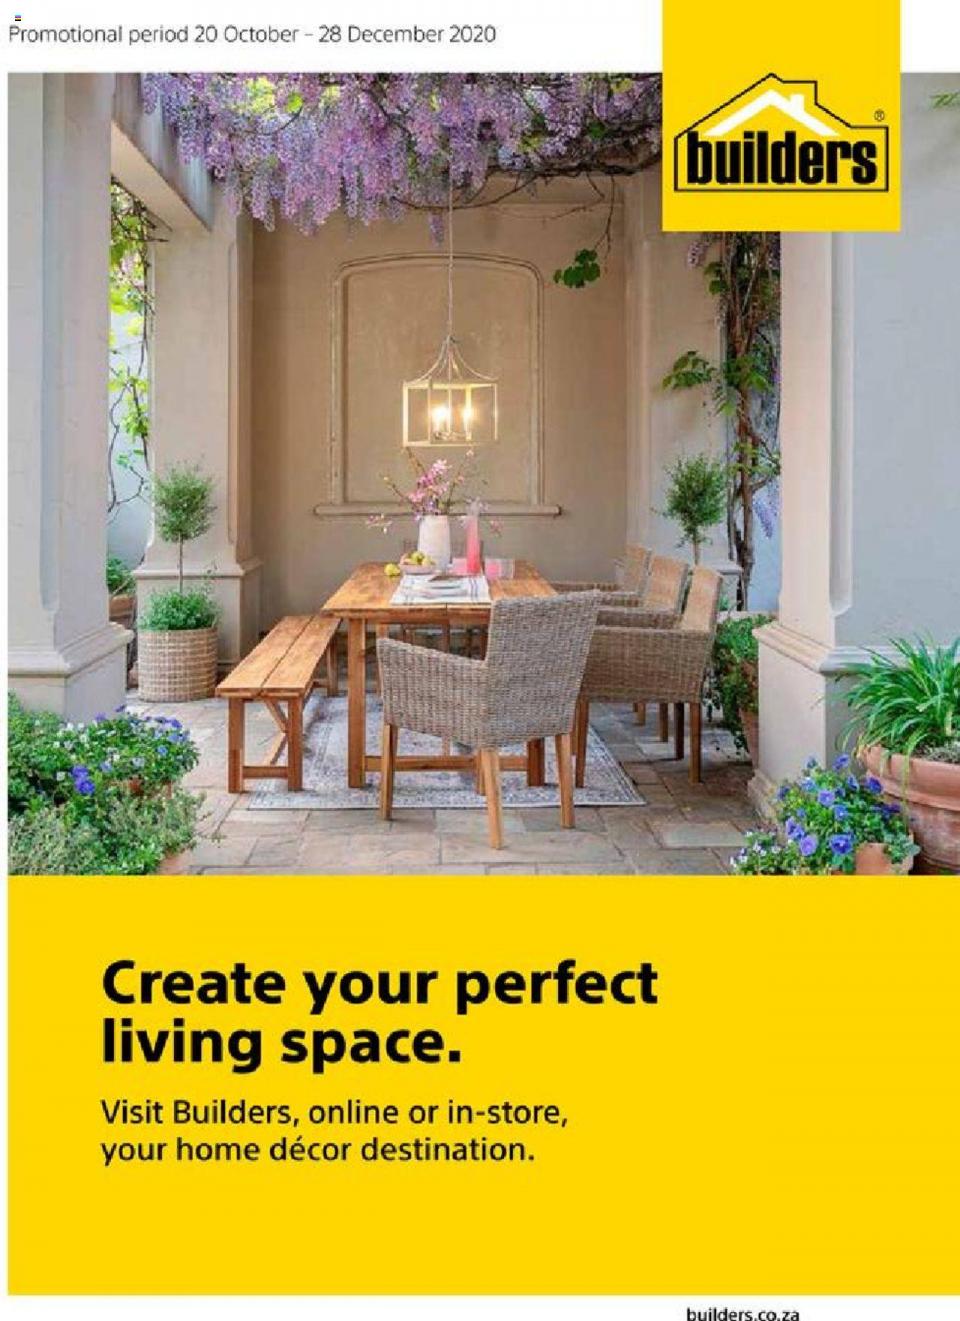 builders warehouse specials create your perfect living space 20 october 2020